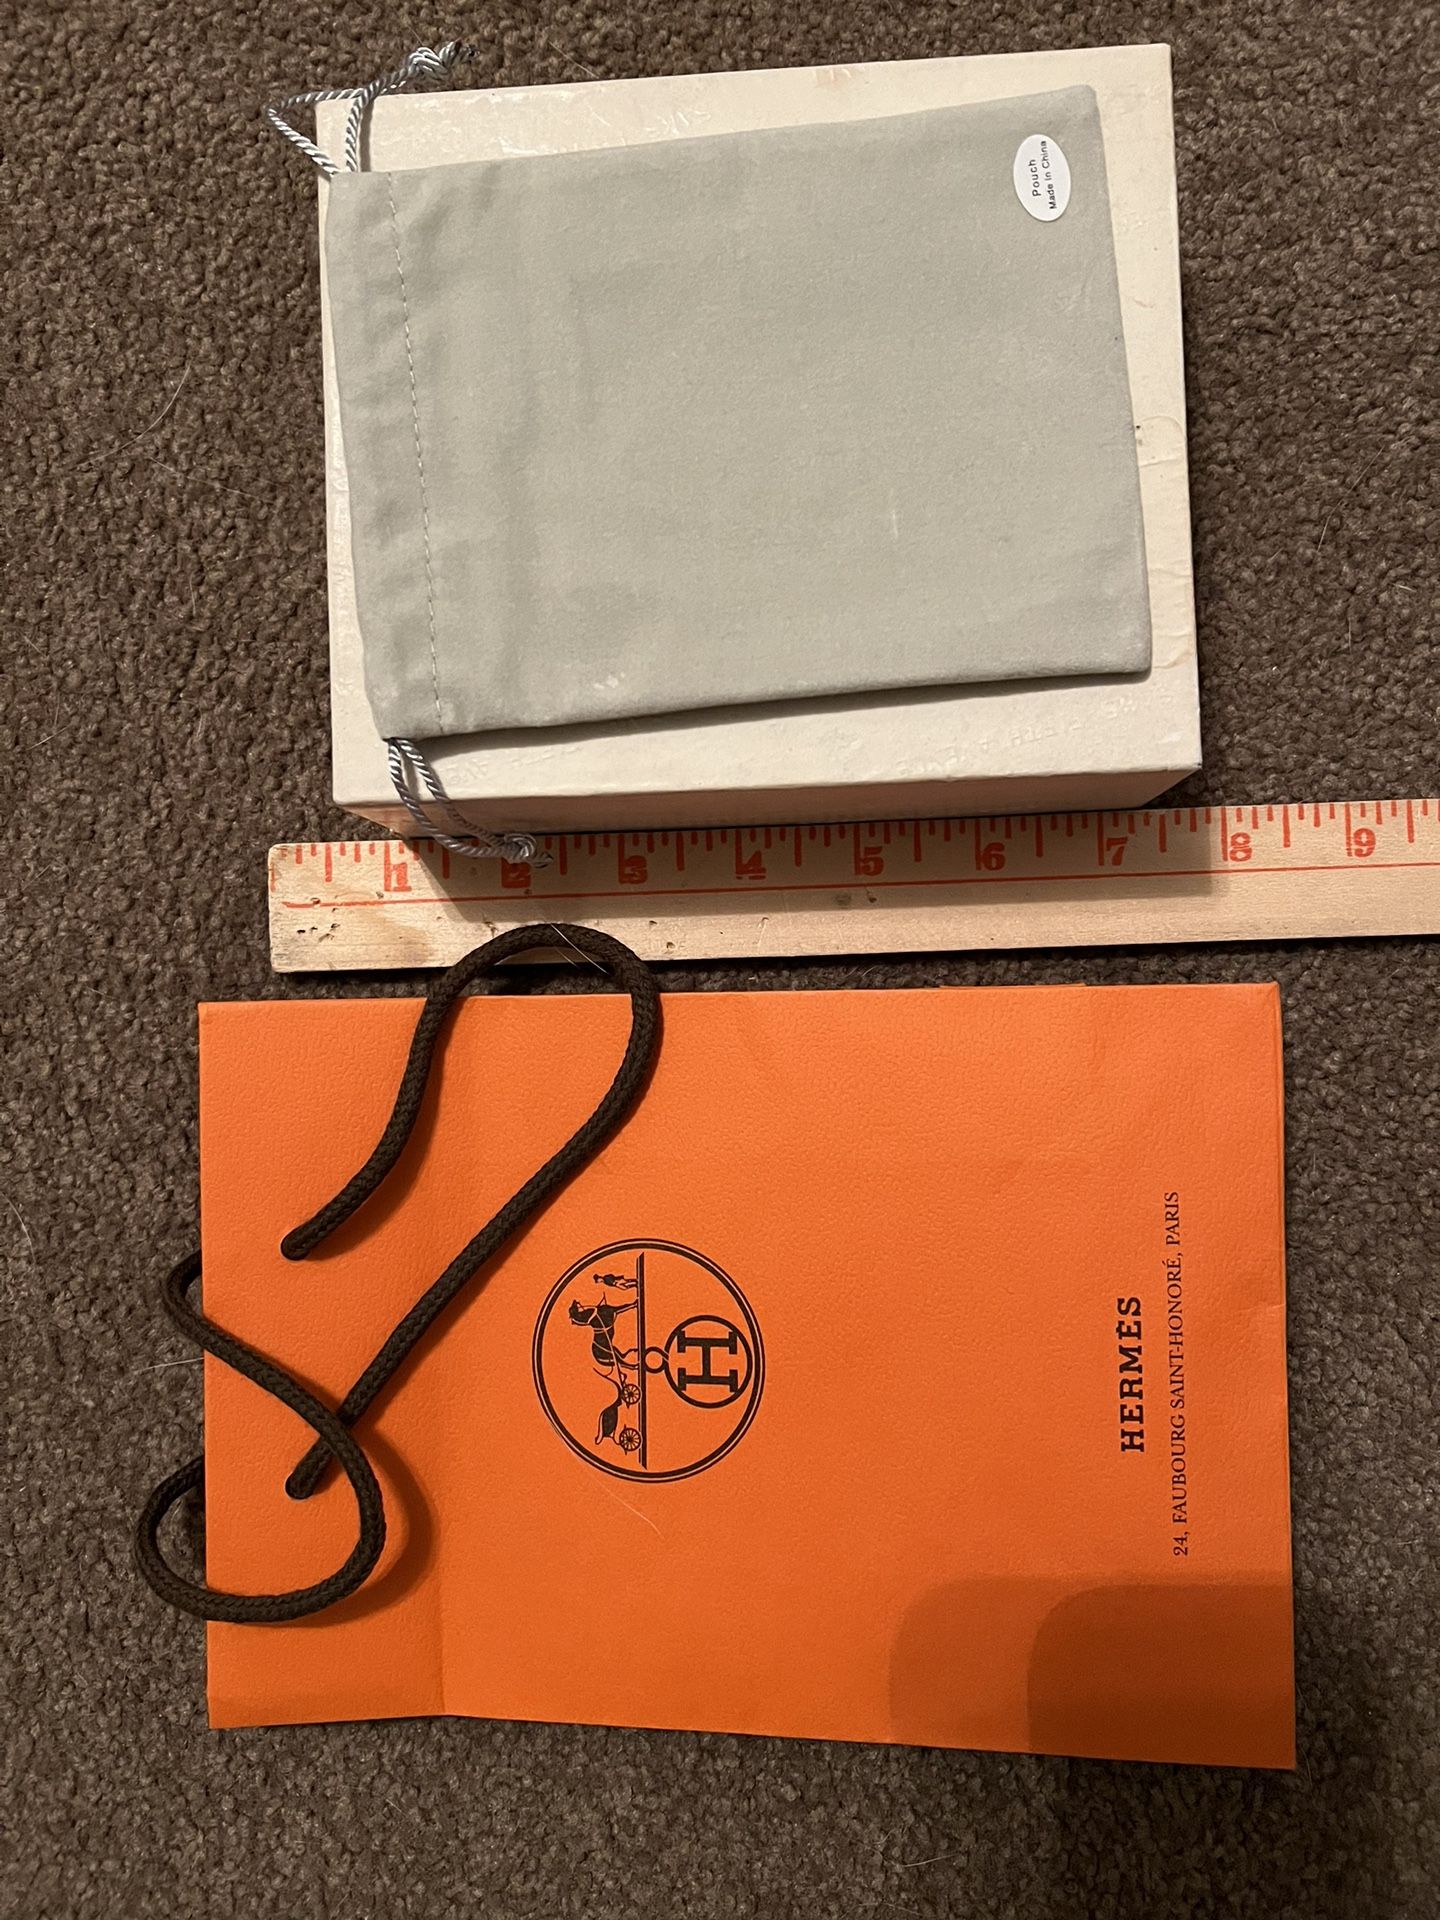 Hermes Gift Bag & Neiman Marcus Jewelry Pouch